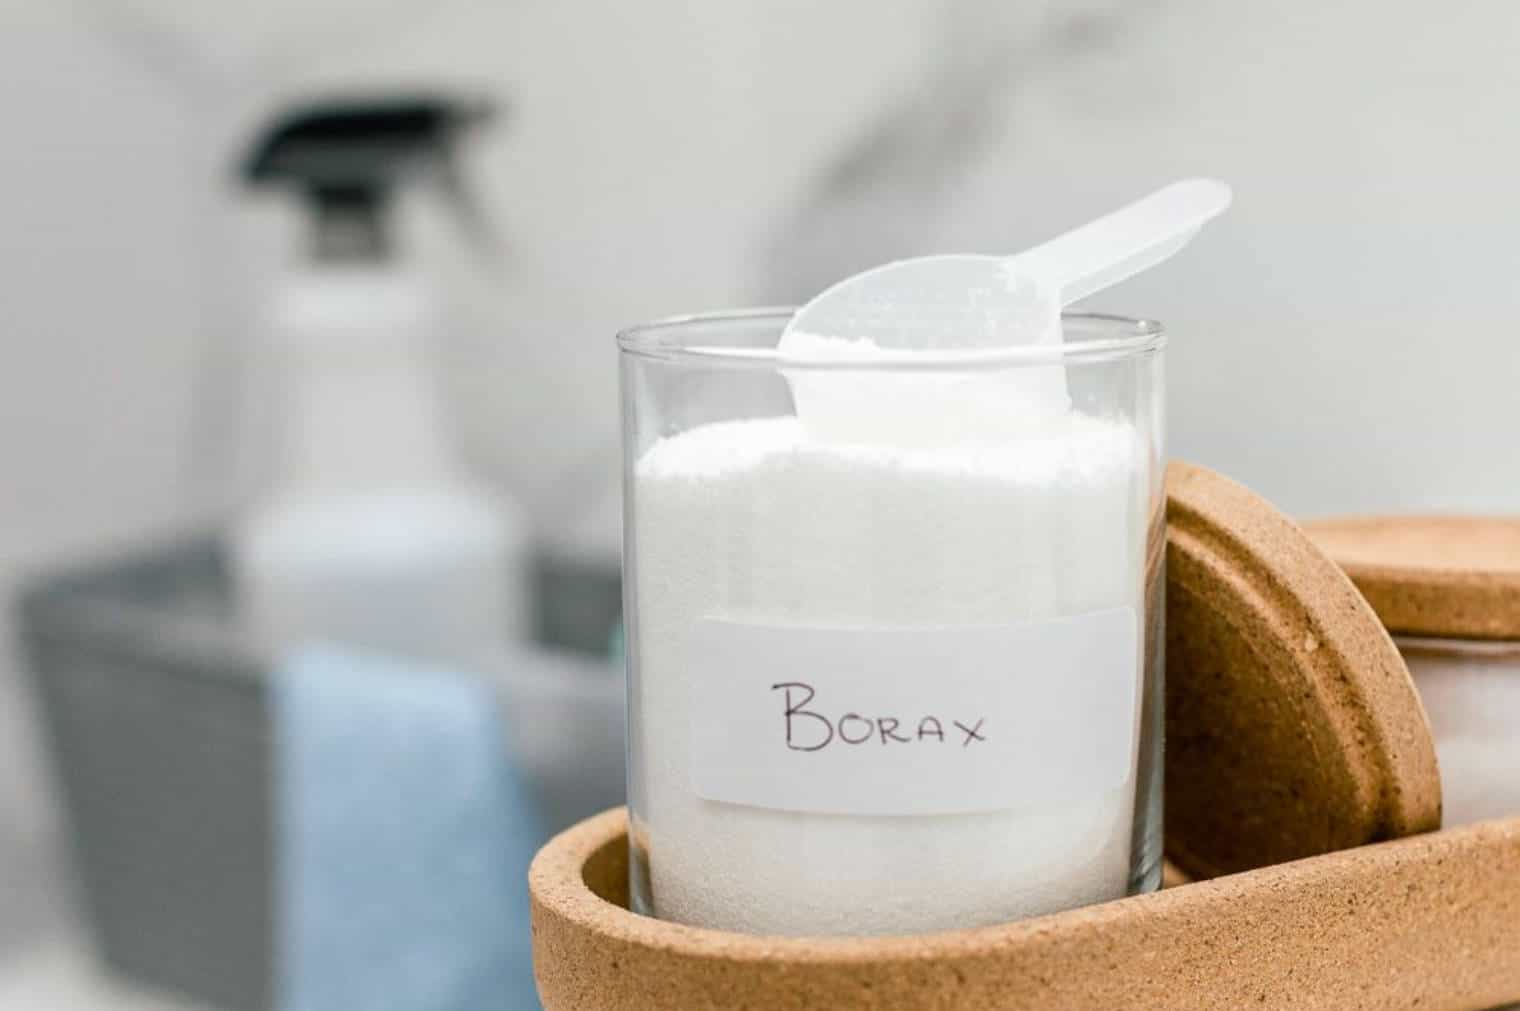 Soften clothes with borax